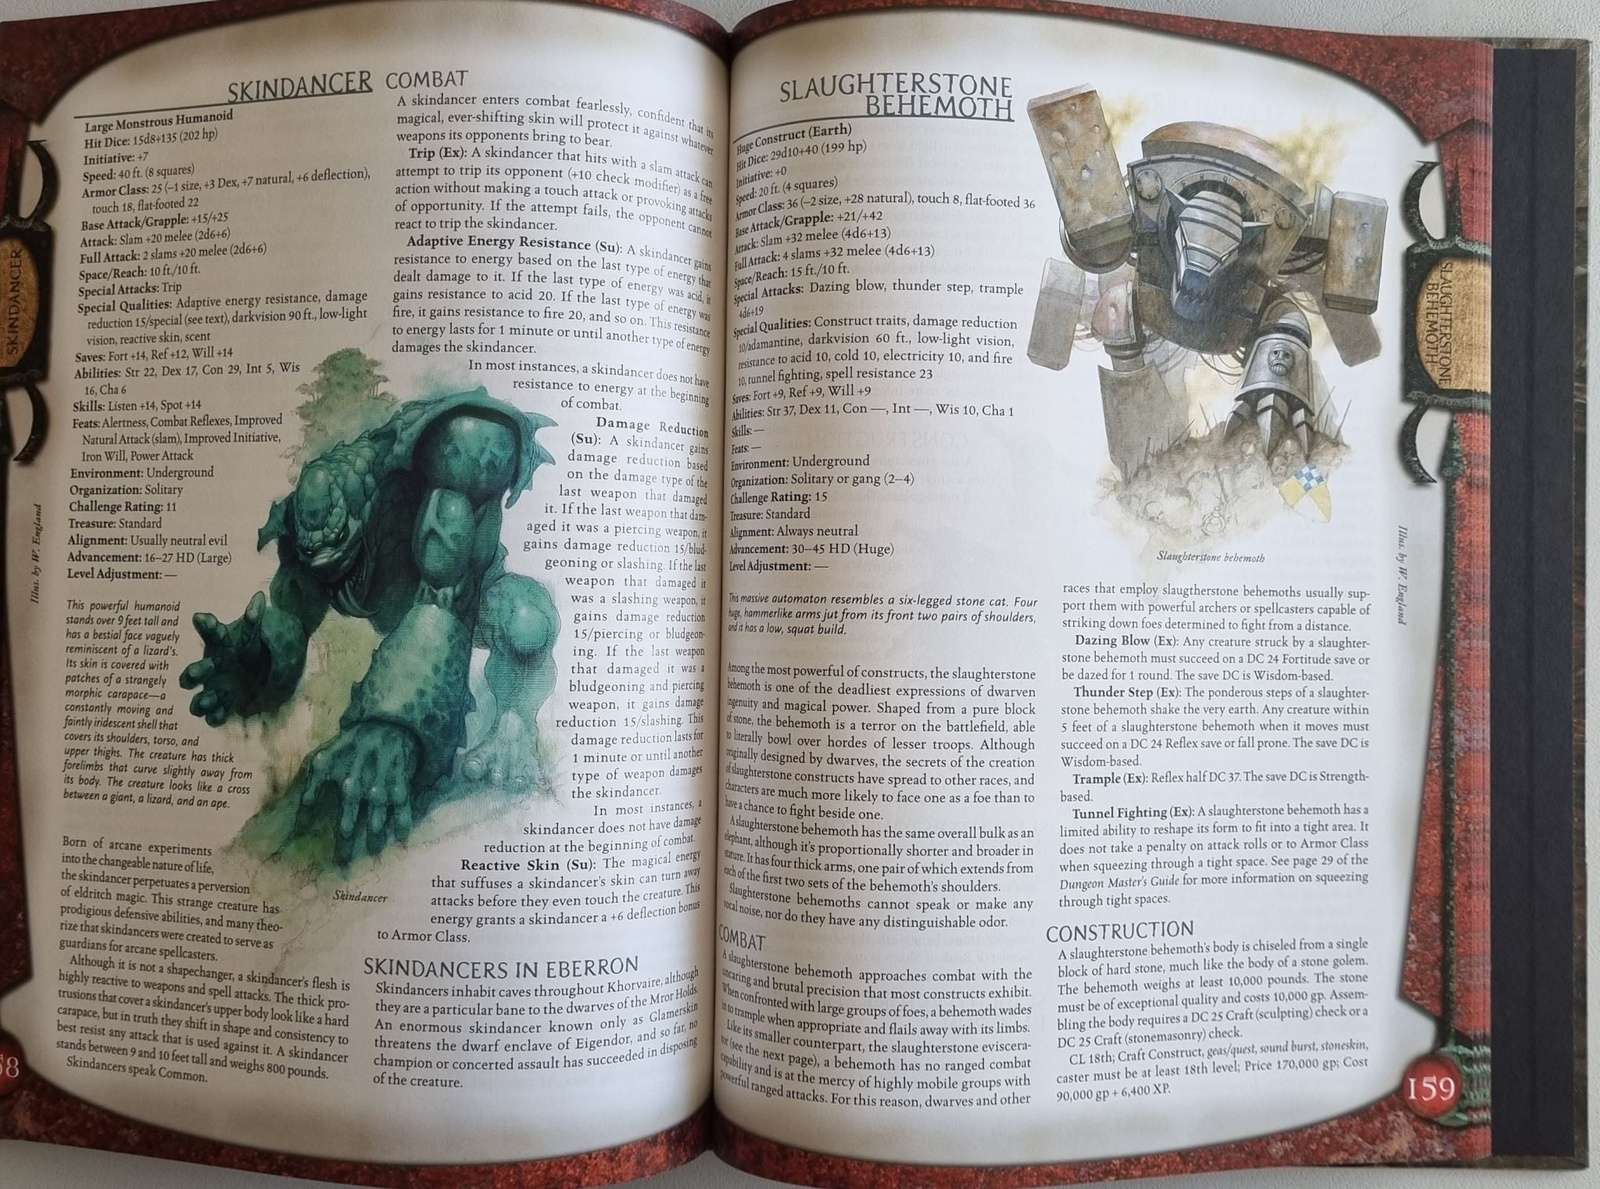 Dungeons and Dragons - Monster Manual III (3.5 e) Default Title